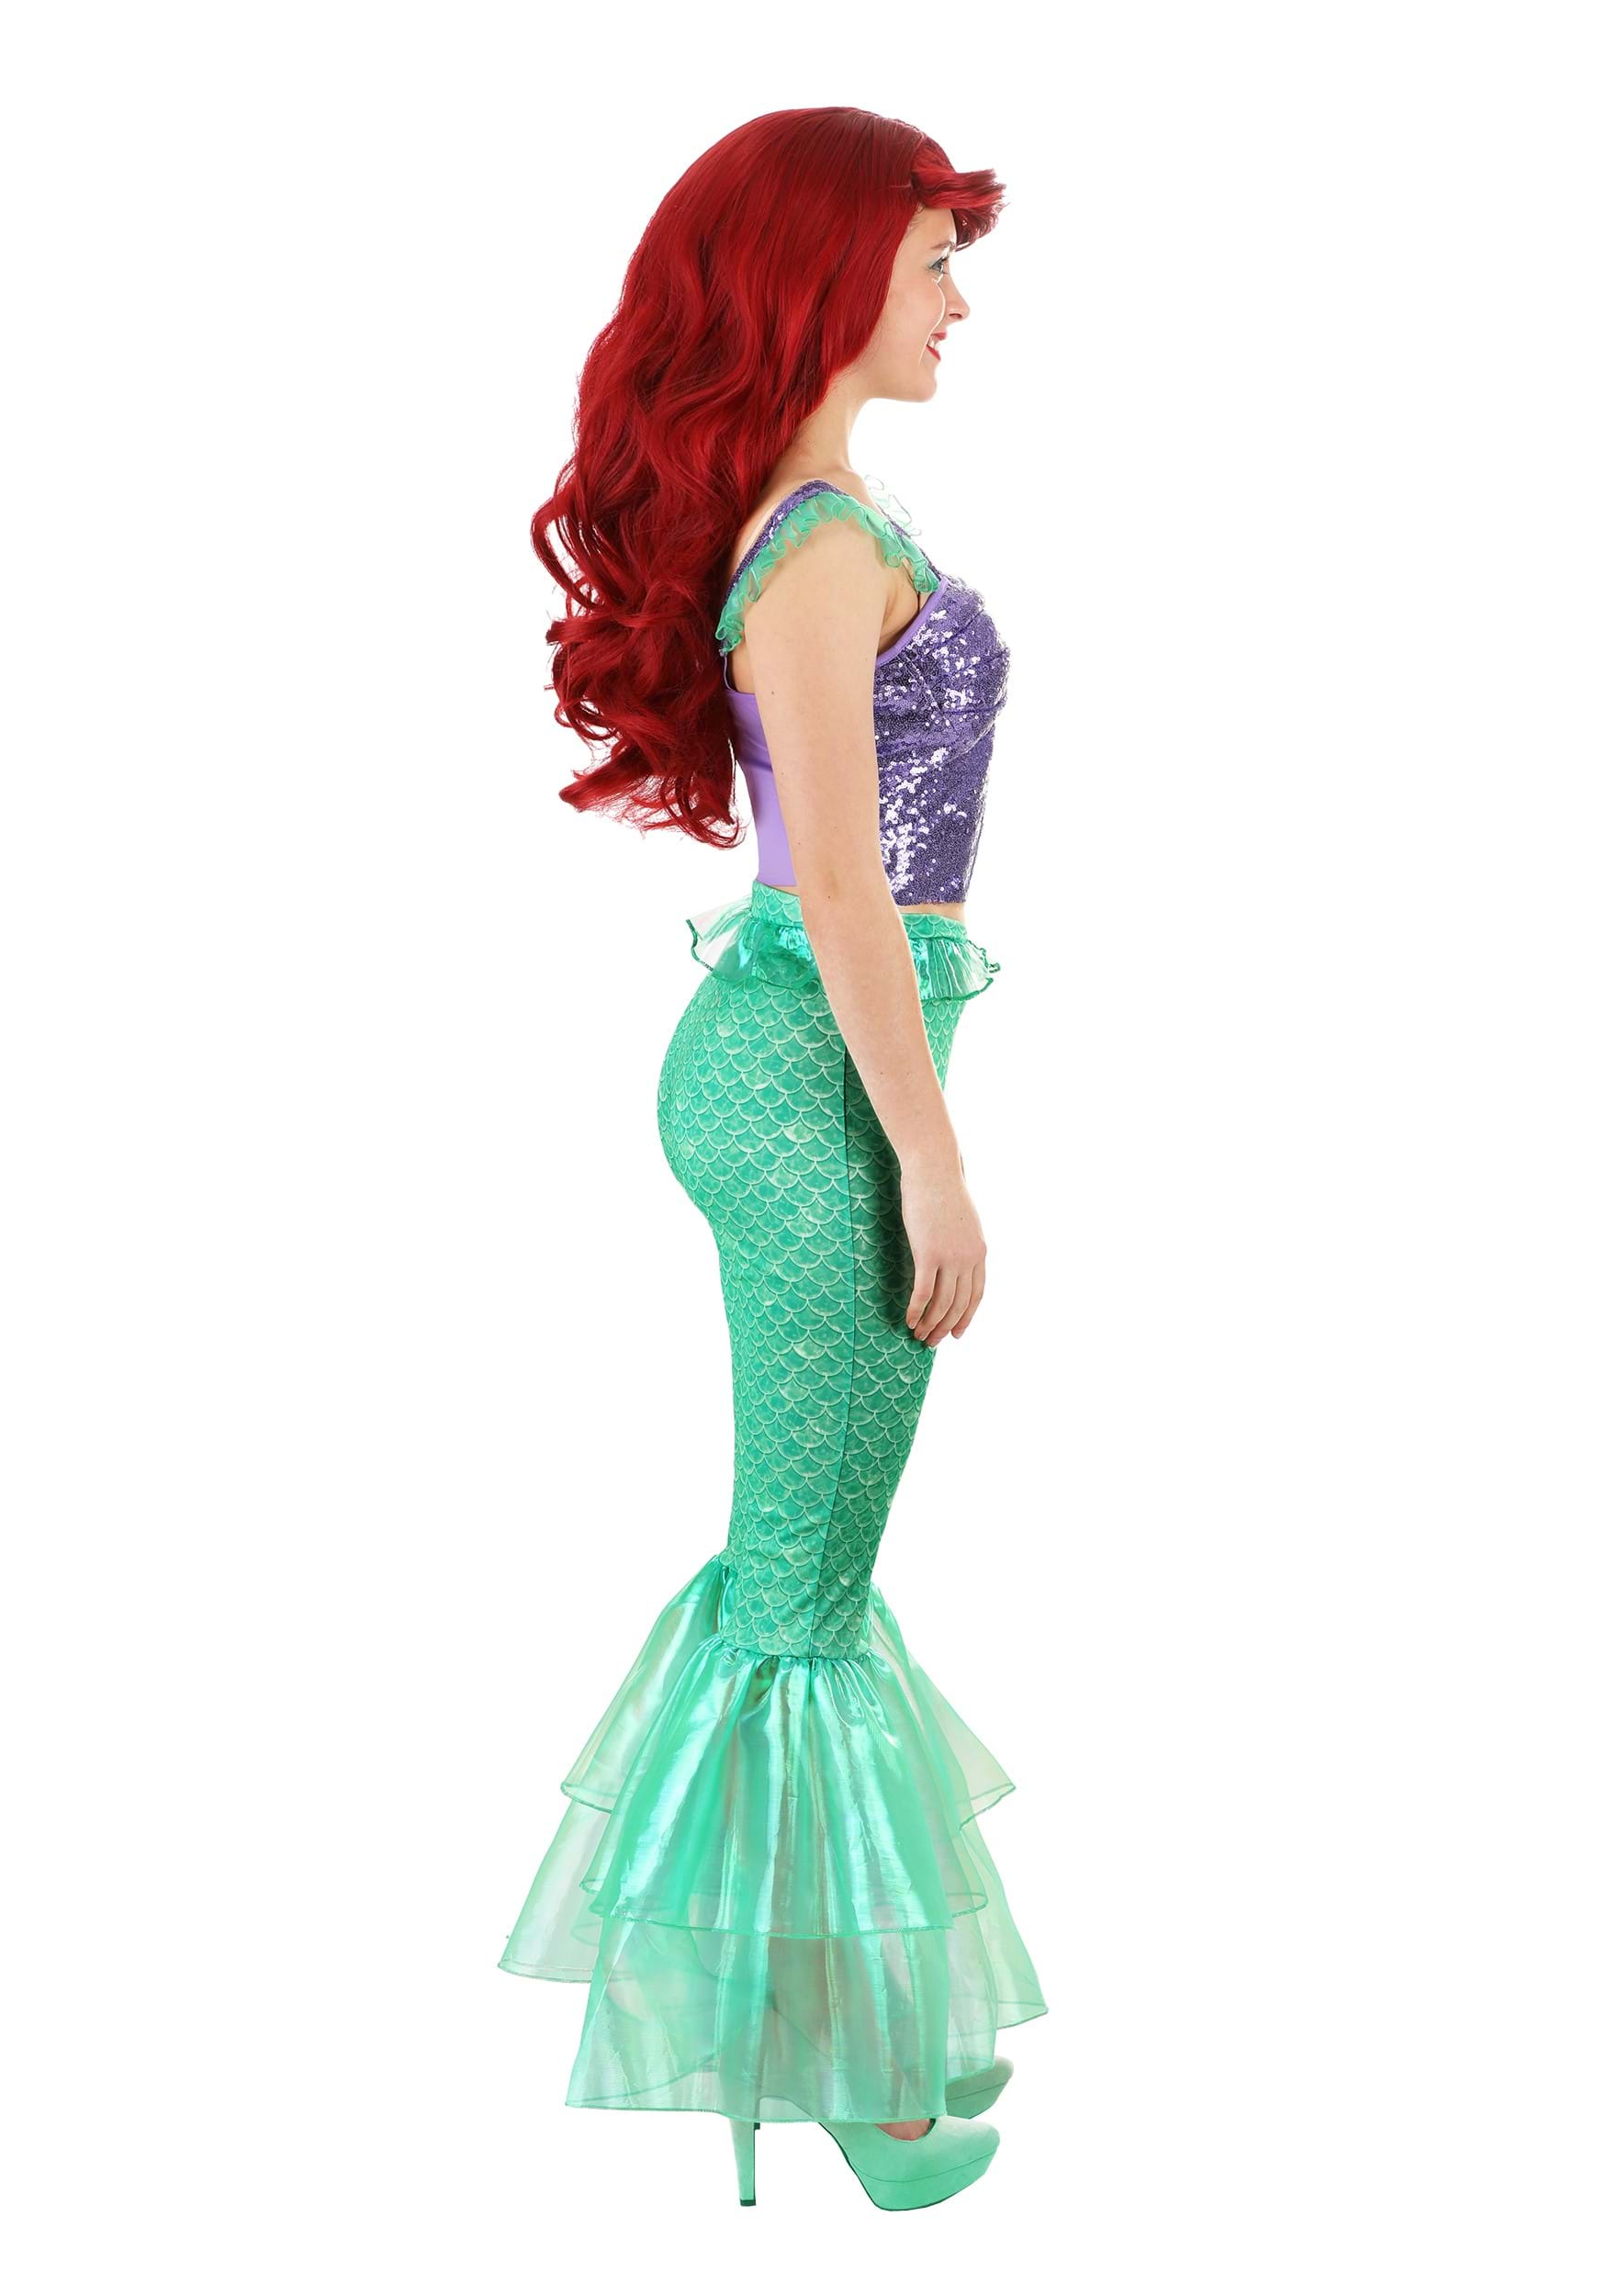 Disney Ariel Costume Outfit For Women